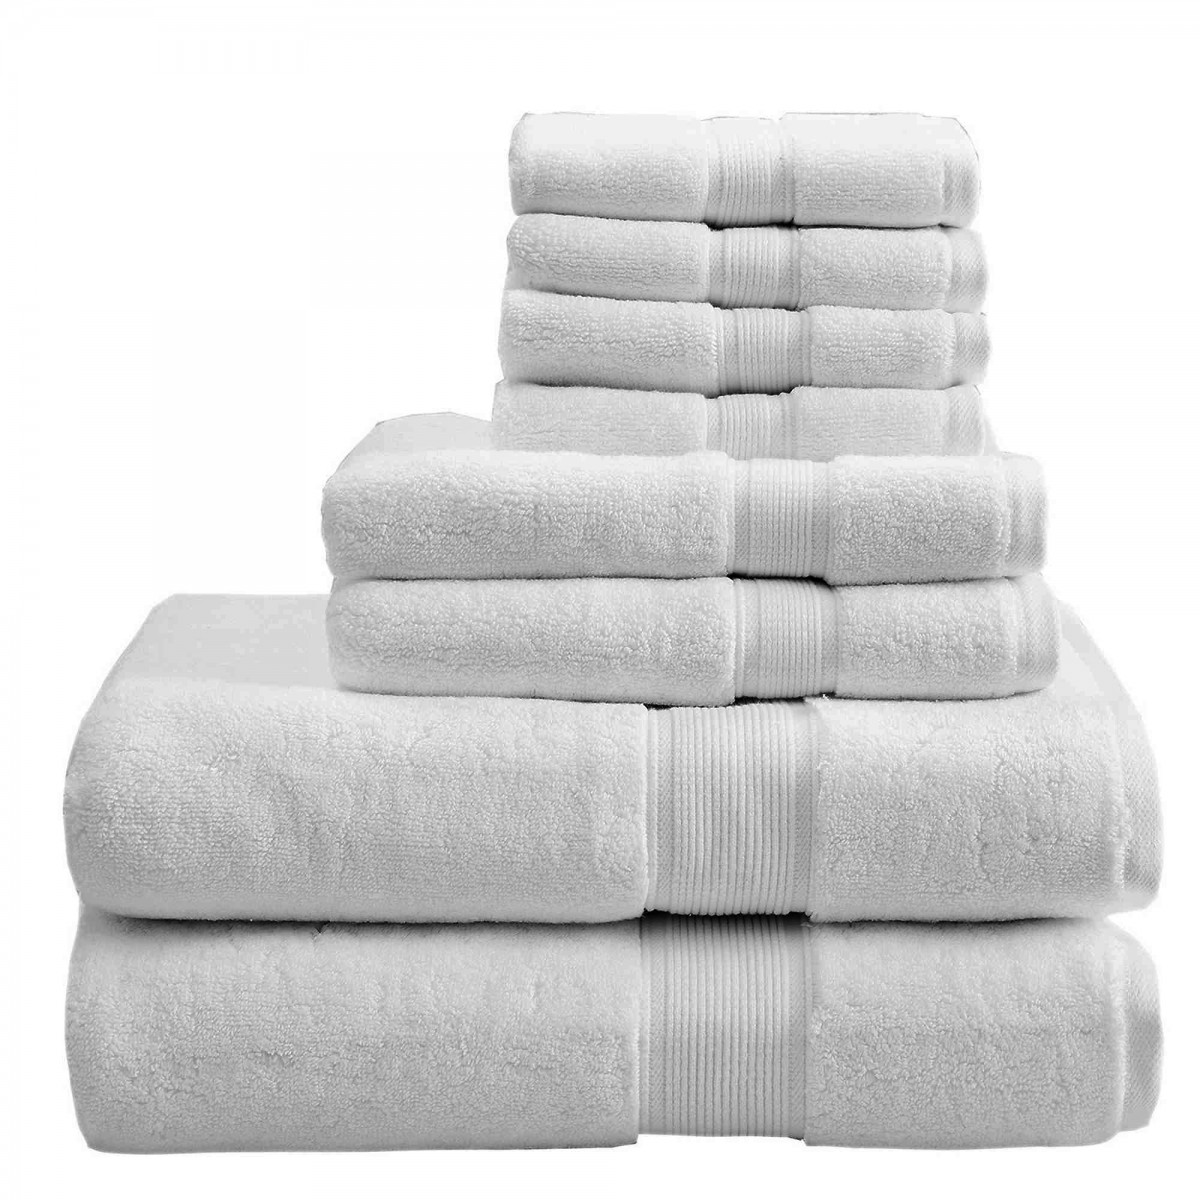 1 tapis de bain 50x80 cm Various Sizes white 100% Combed Cotton and Thread Count Zero Twist Hotel Spa 660 g/m2 ORPHEEBS Luxury Towels and Bath Sheets